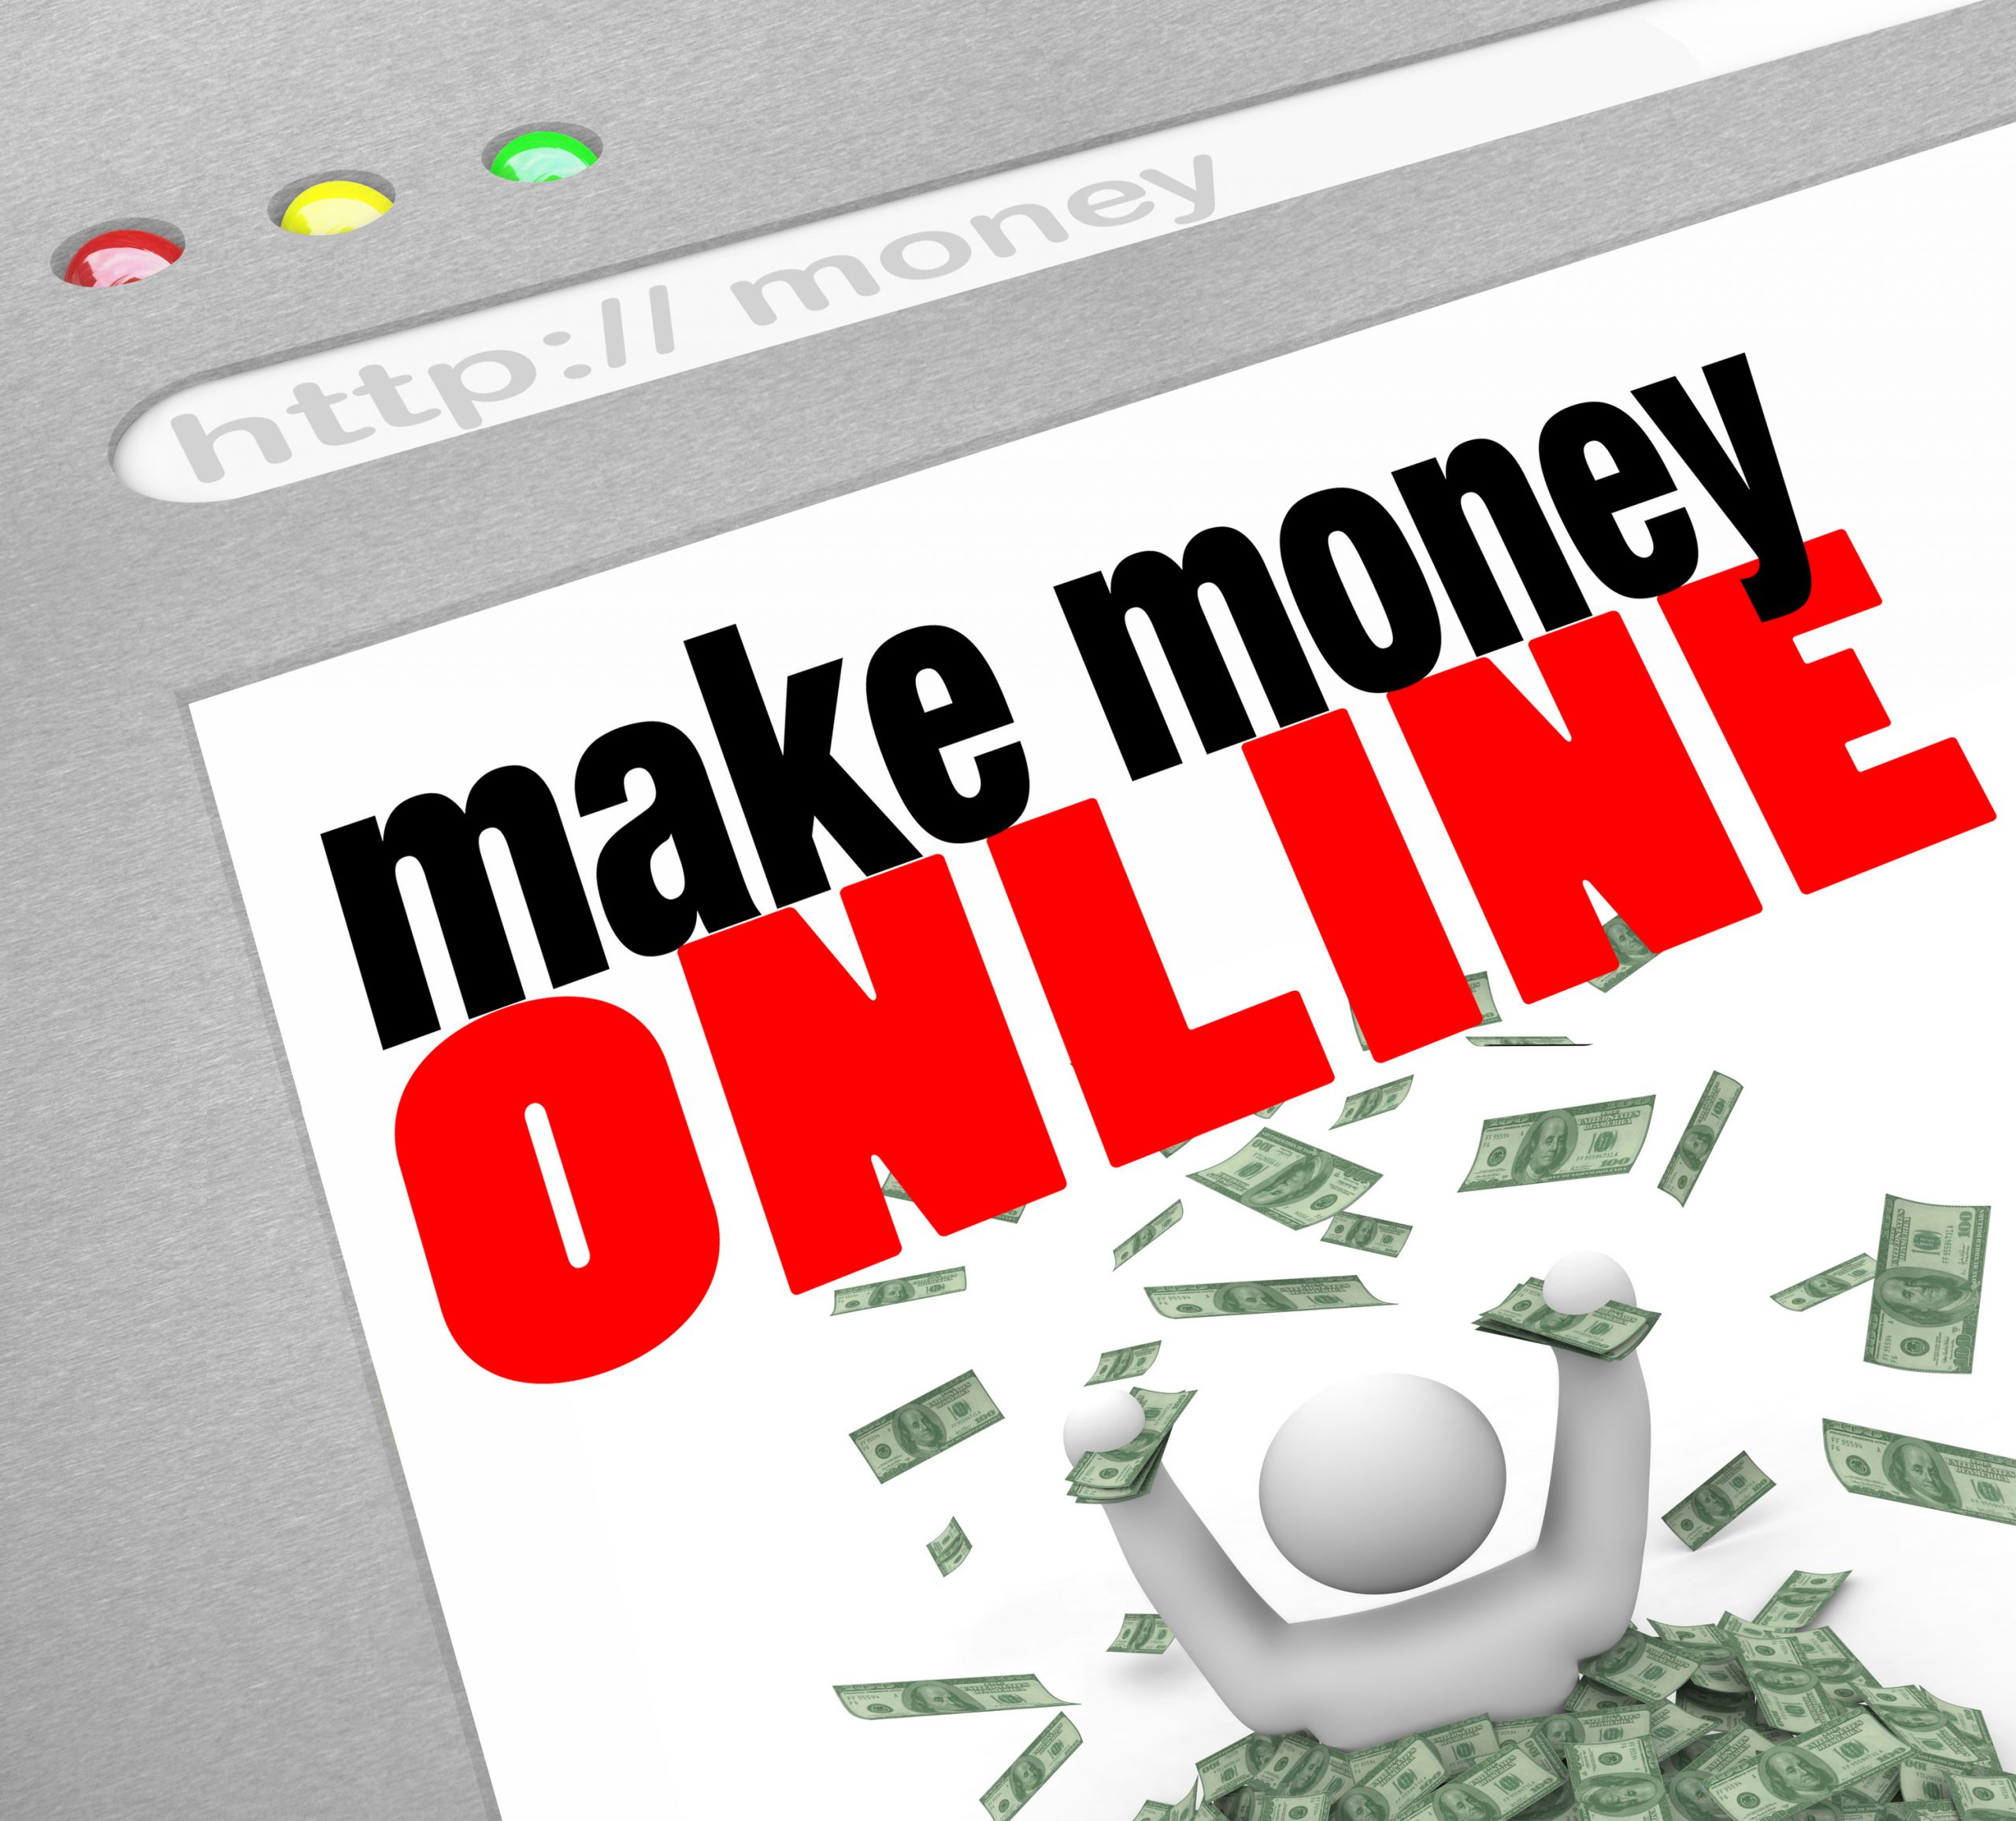 Seven really hard ways you can make money on the internet!